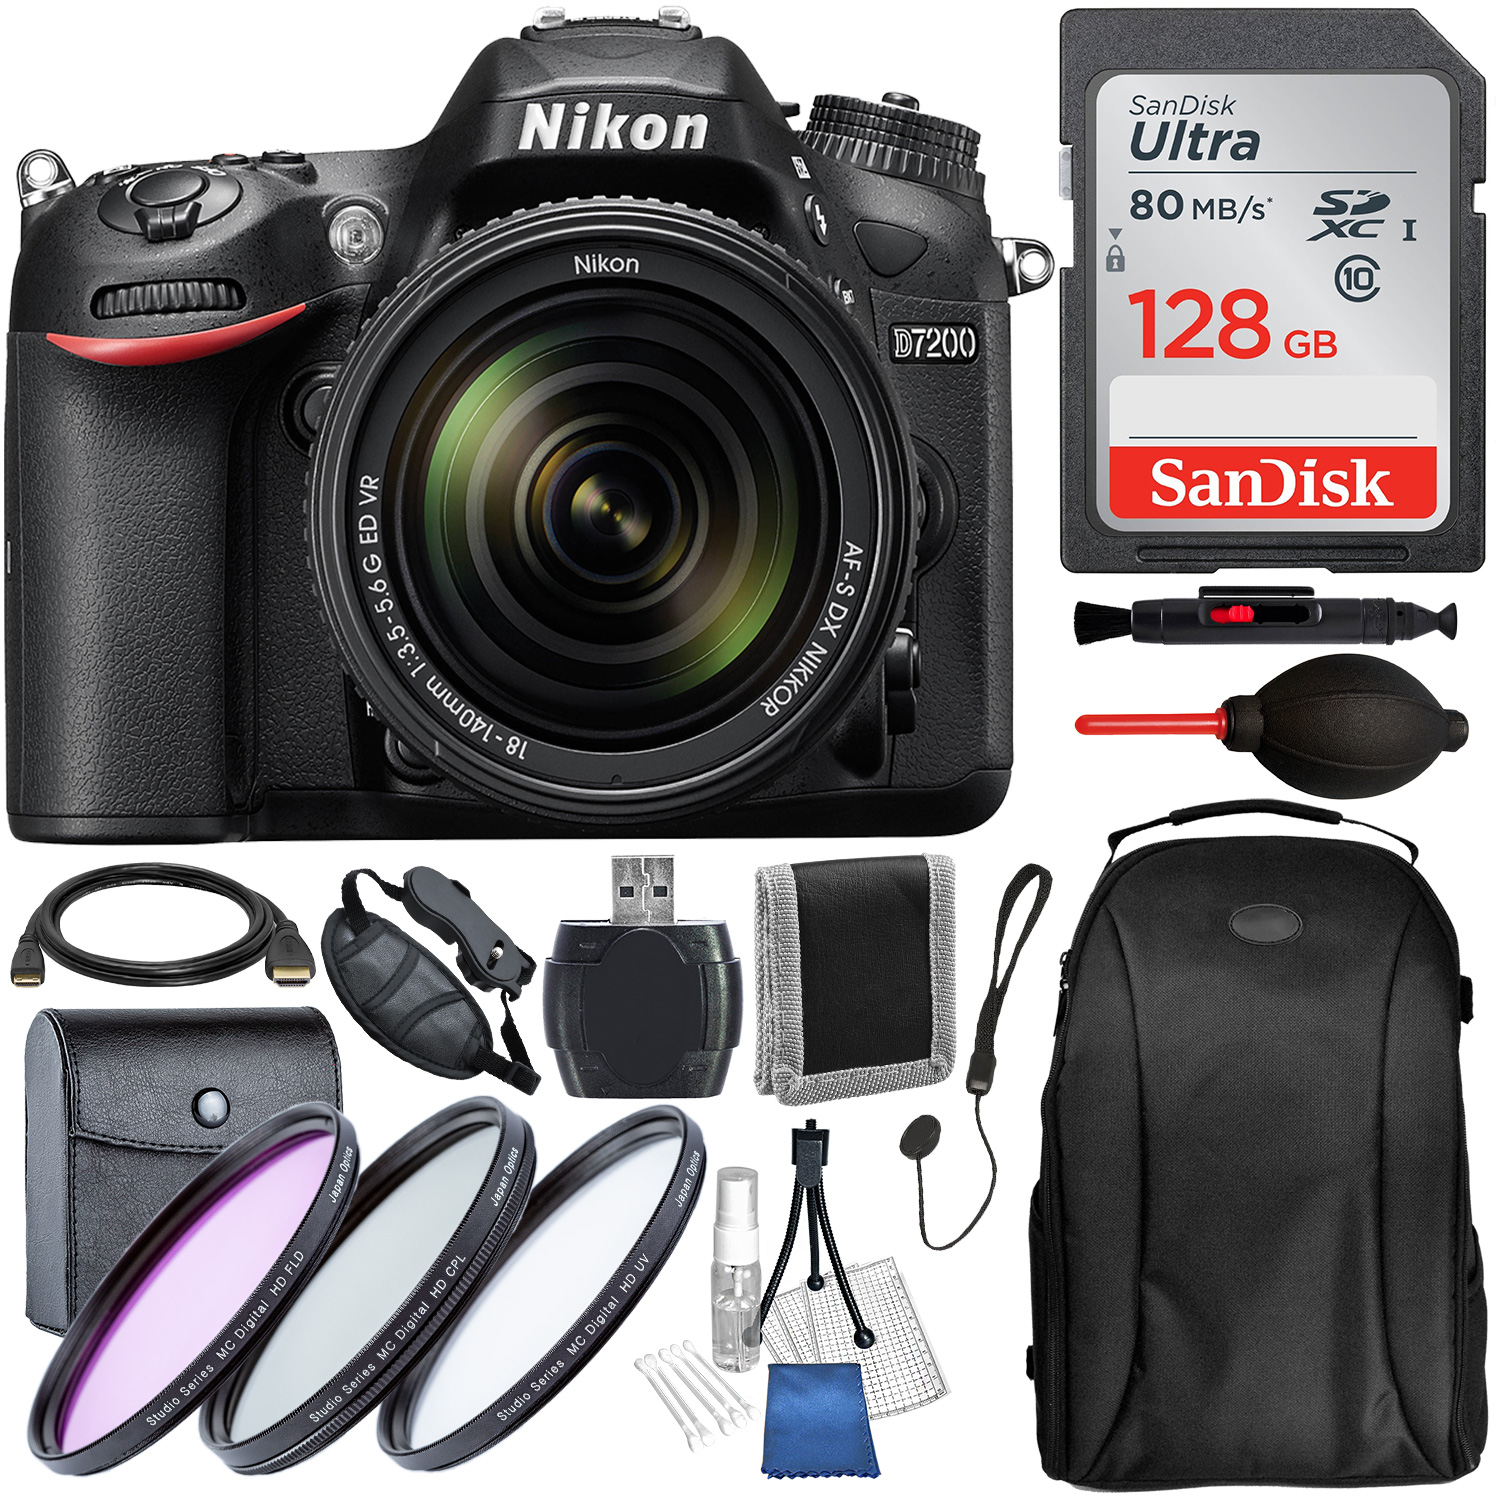 Nikon D7200 DSLR Camera with 18-140mm Lens and Accessory Bundle